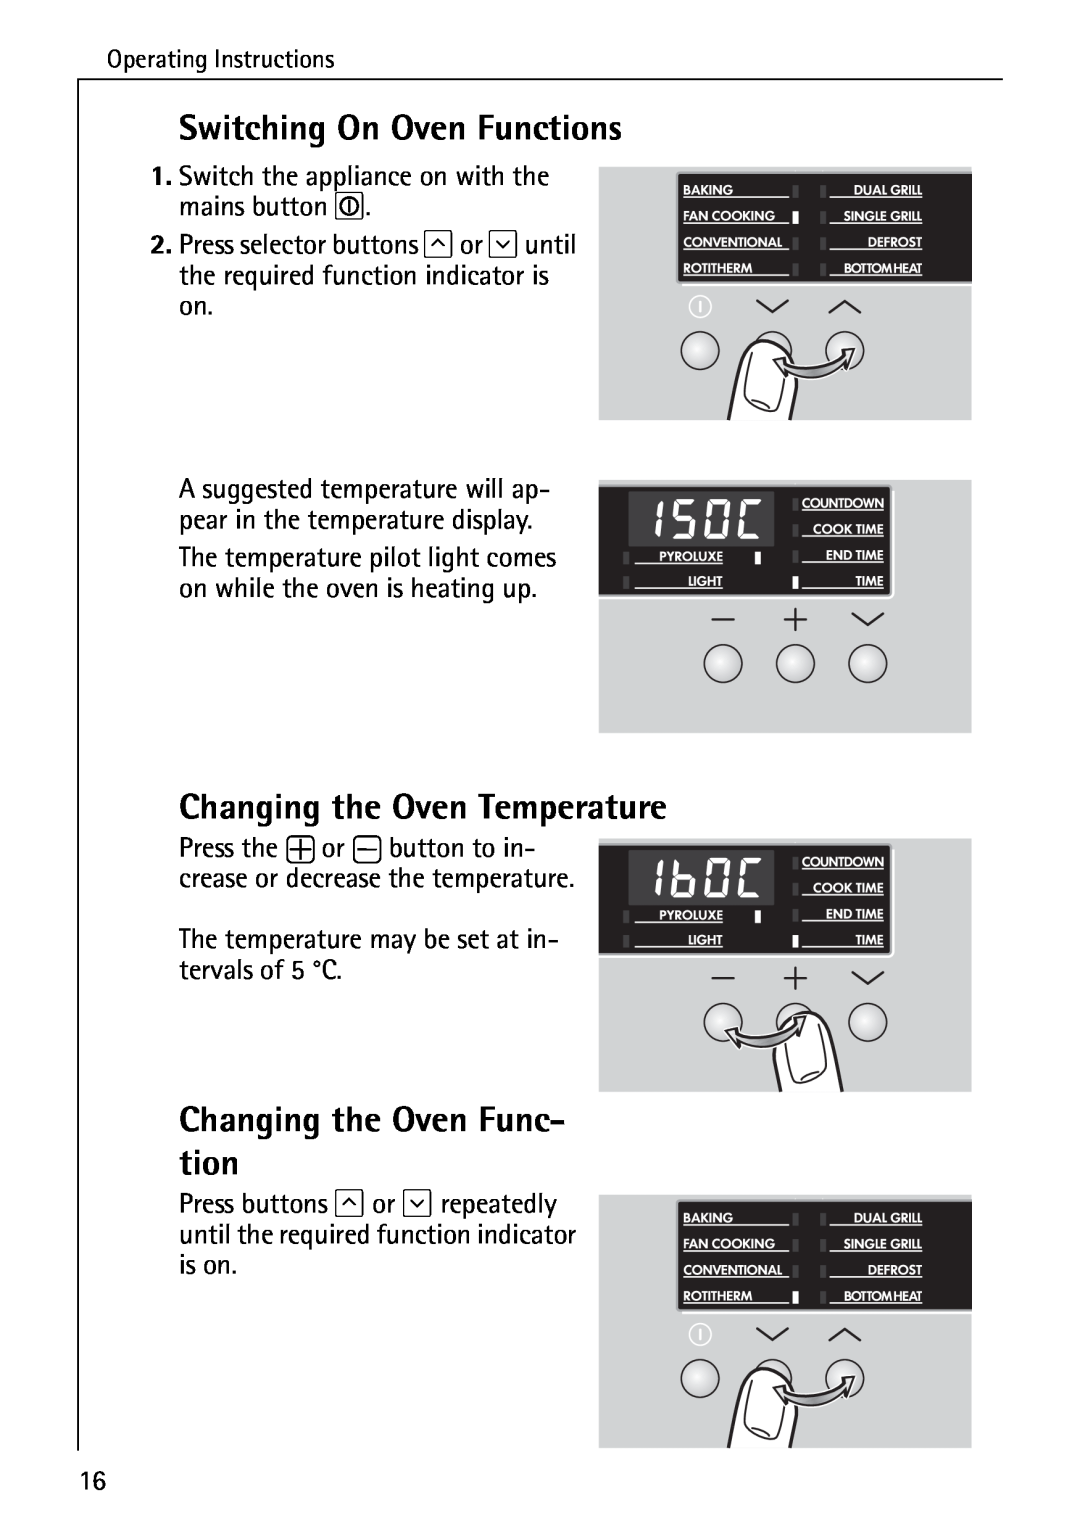 Electrolux B6140-1 manual Switching On Oven Functions, Changing the Oven Temperature, Changing the Oven Func- tion 